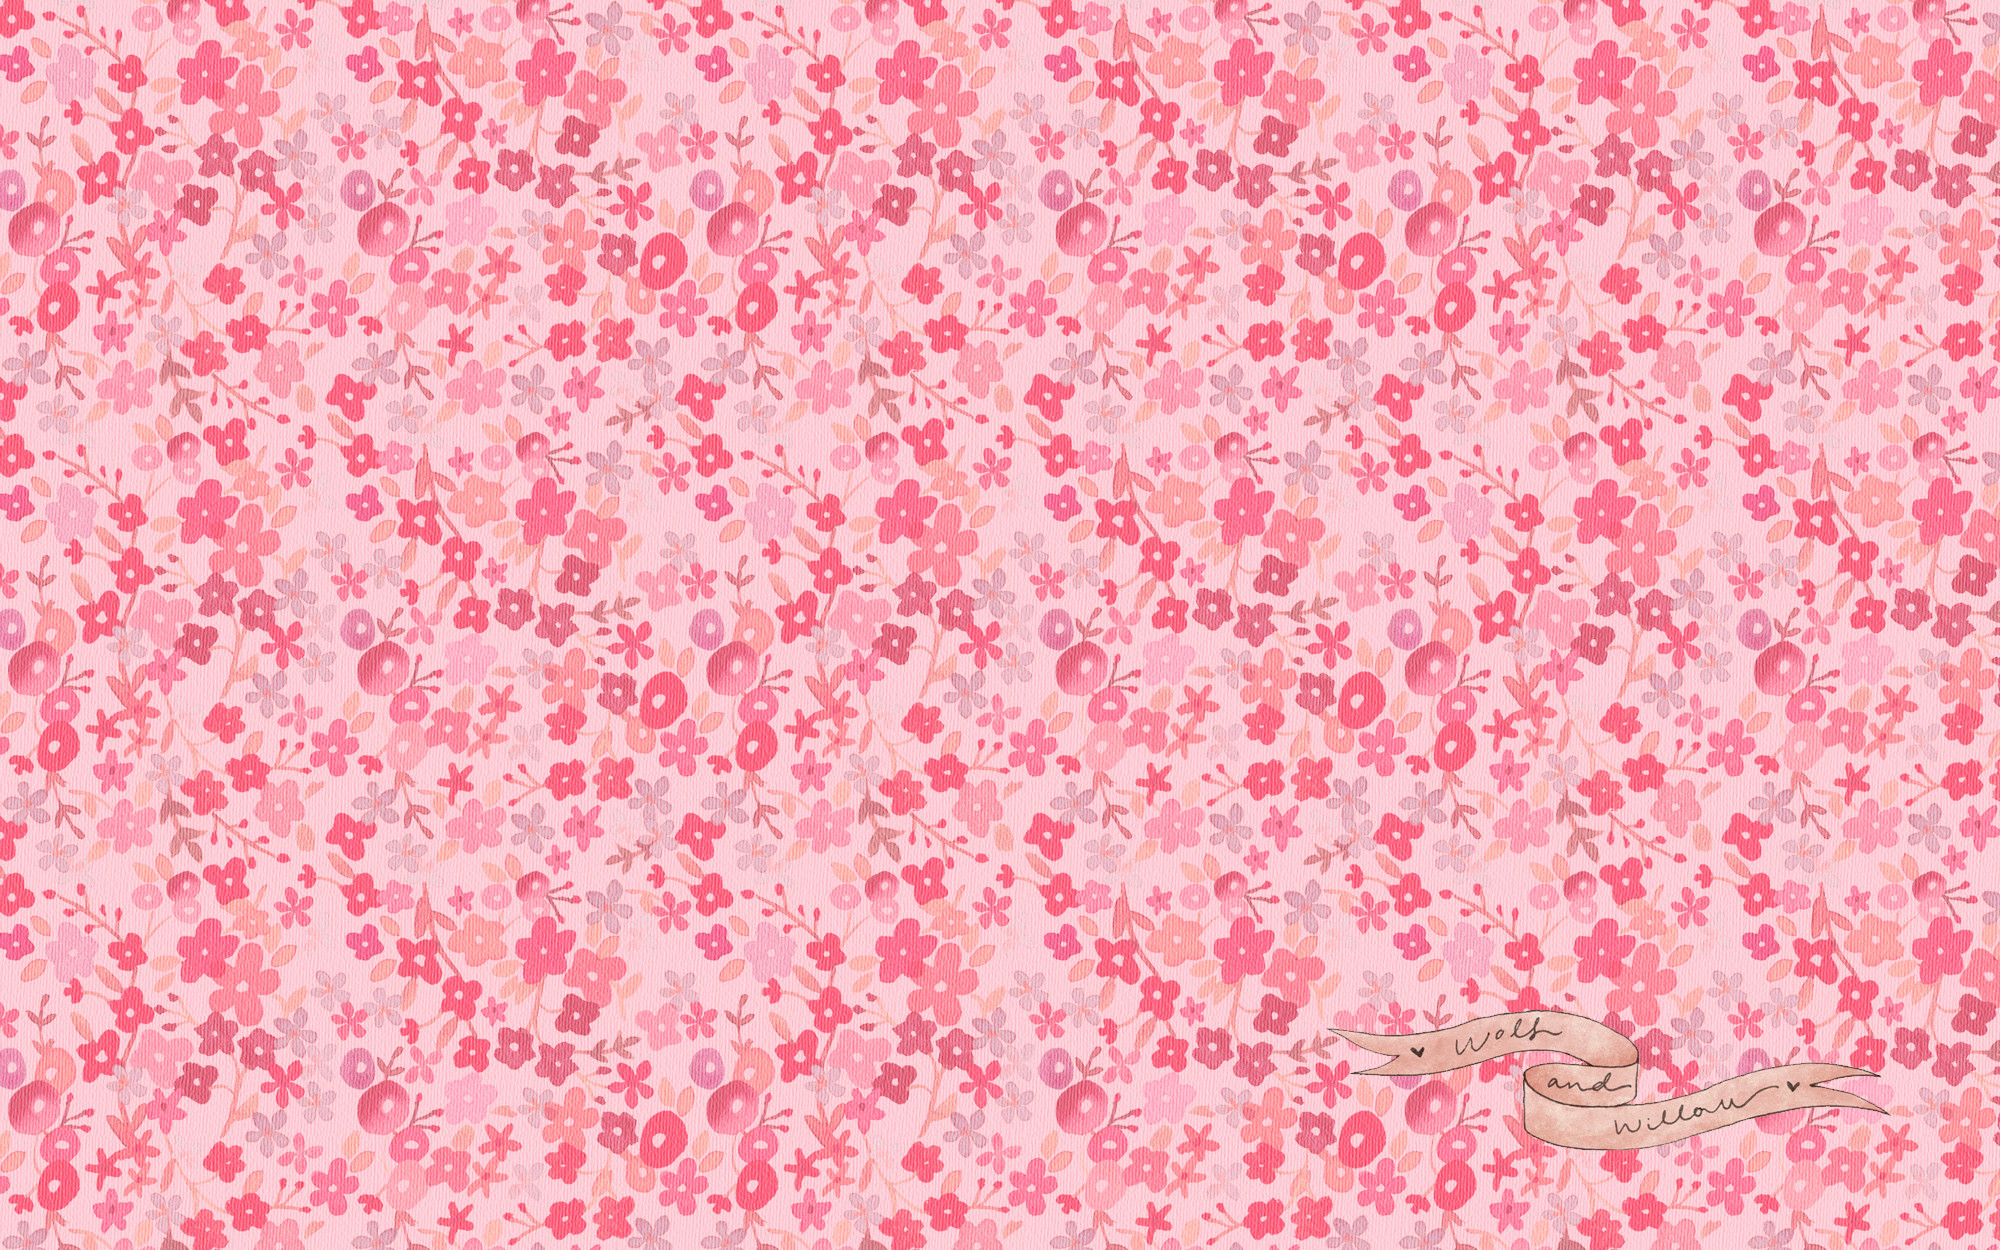 2000x1250 Download Flowers Floral Wallpaper Retro Full Size